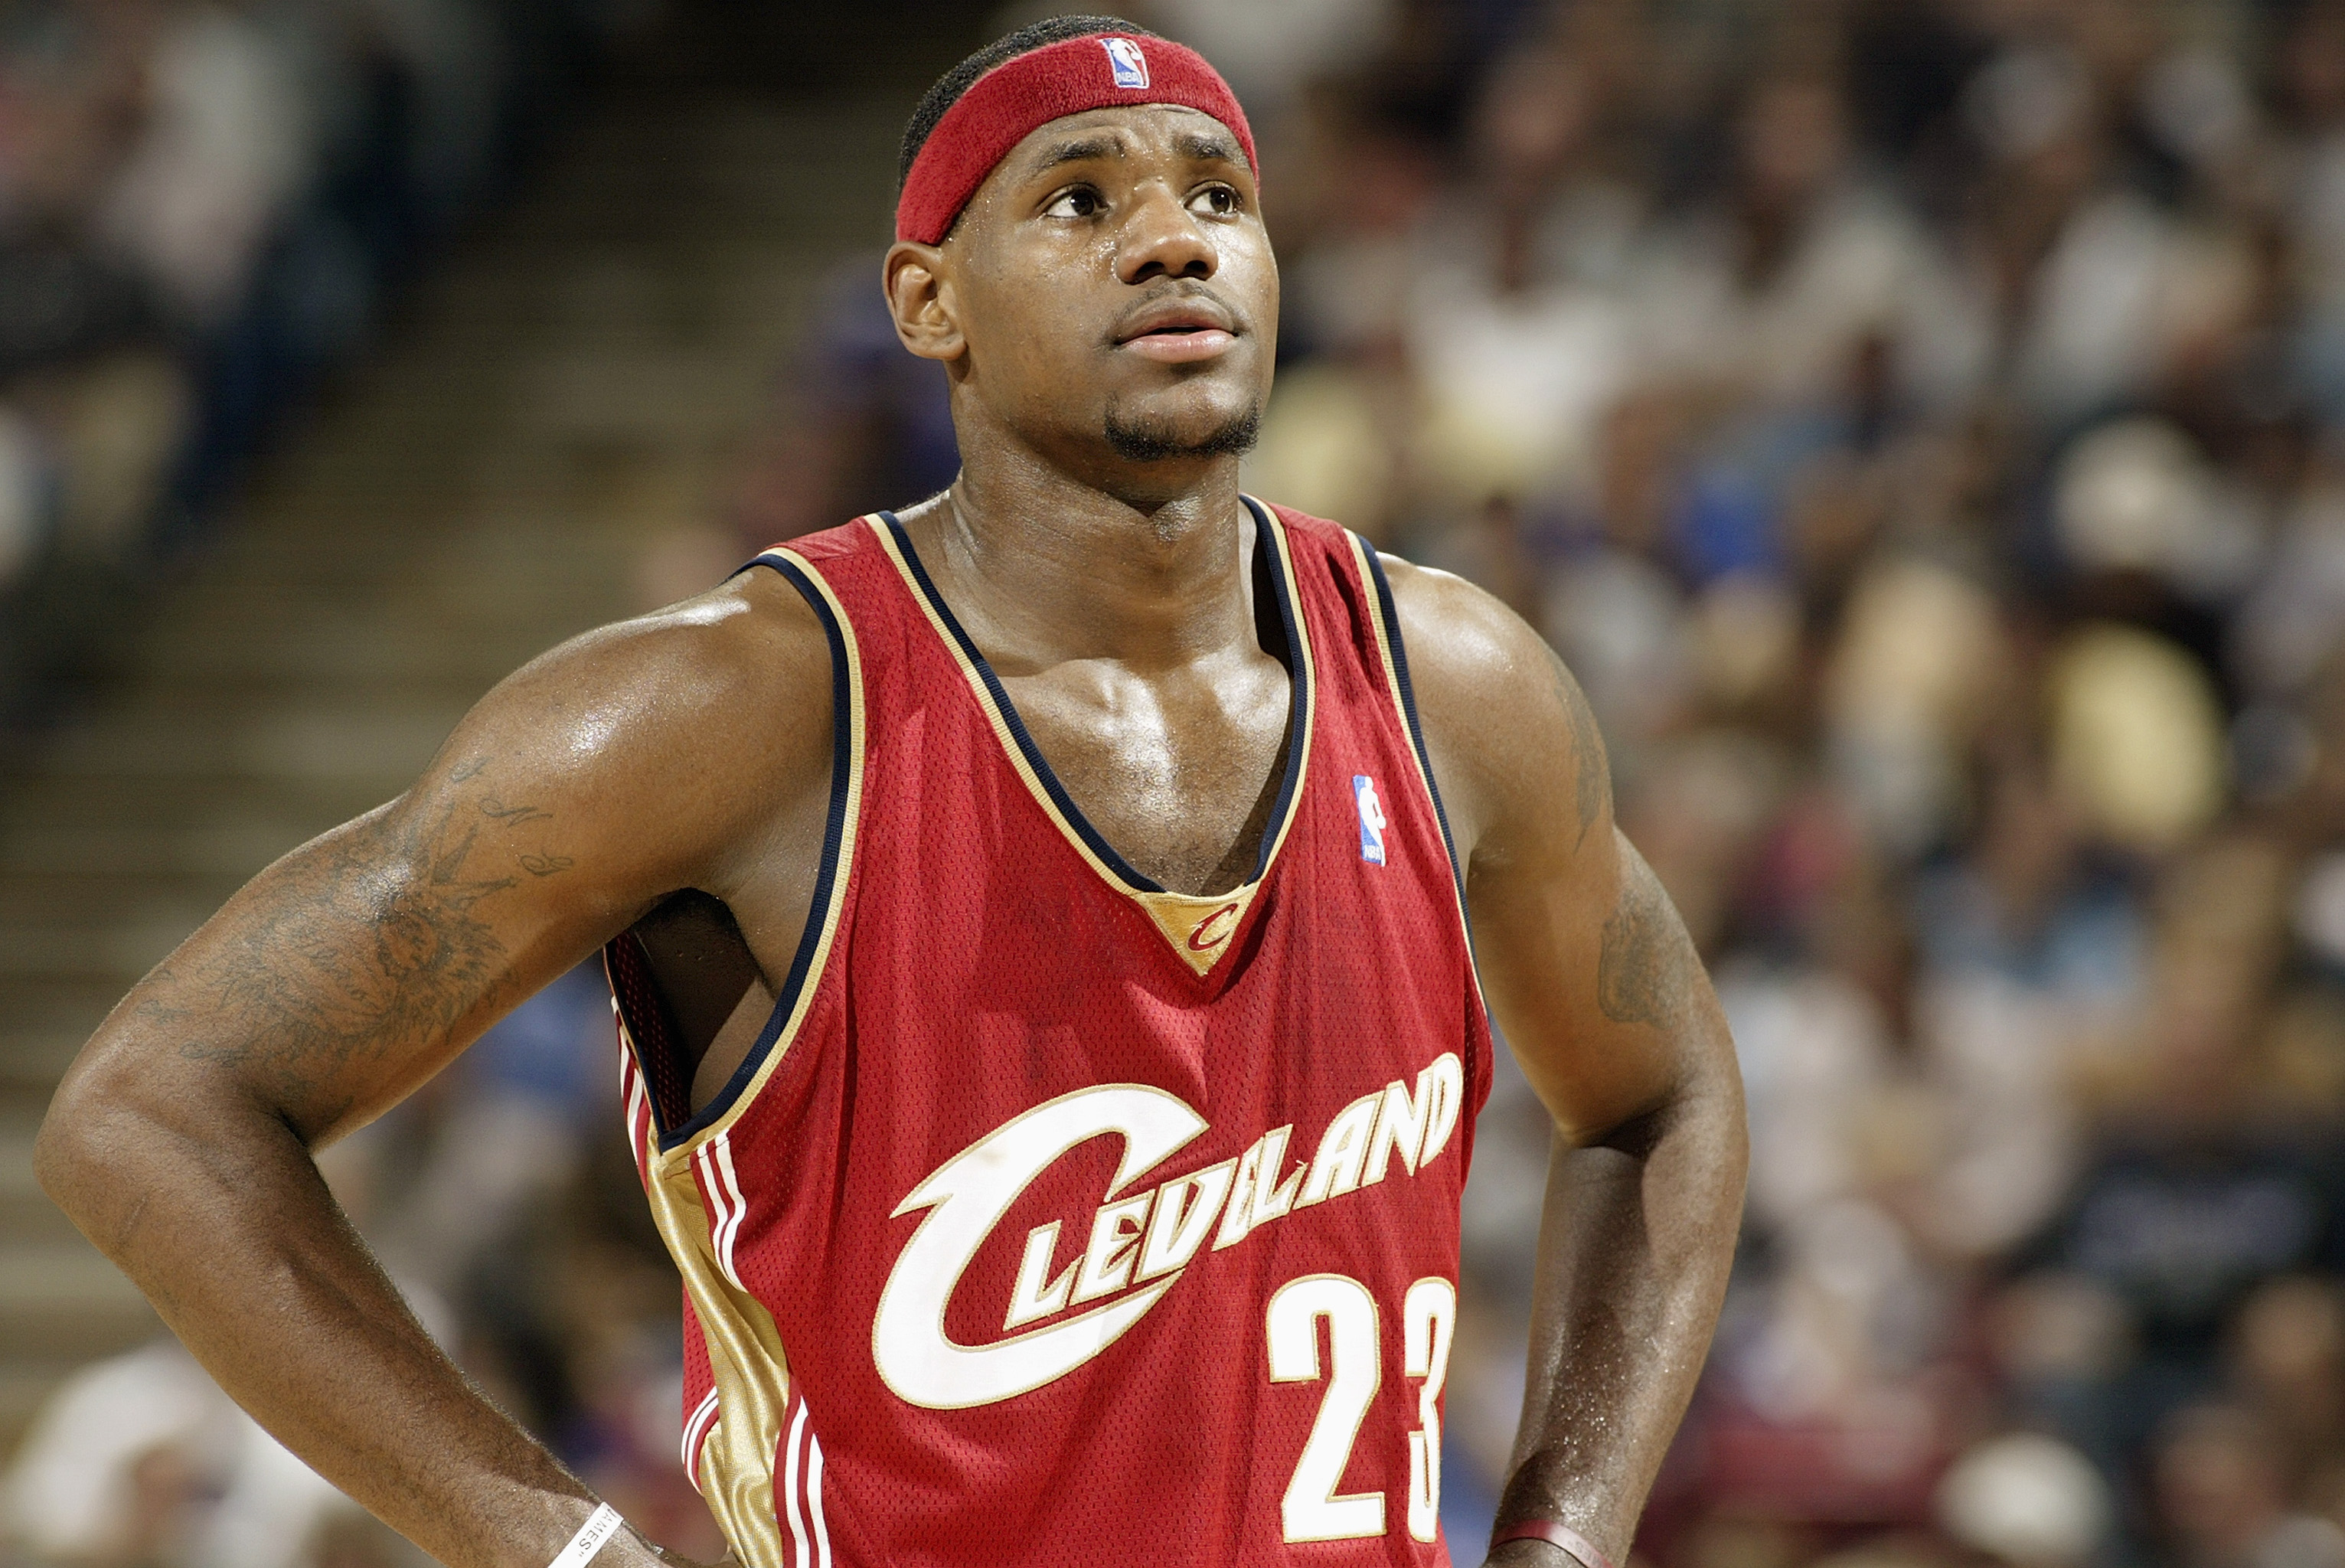 NBA superstar LeBron James going back to Cleveland Cavaliers